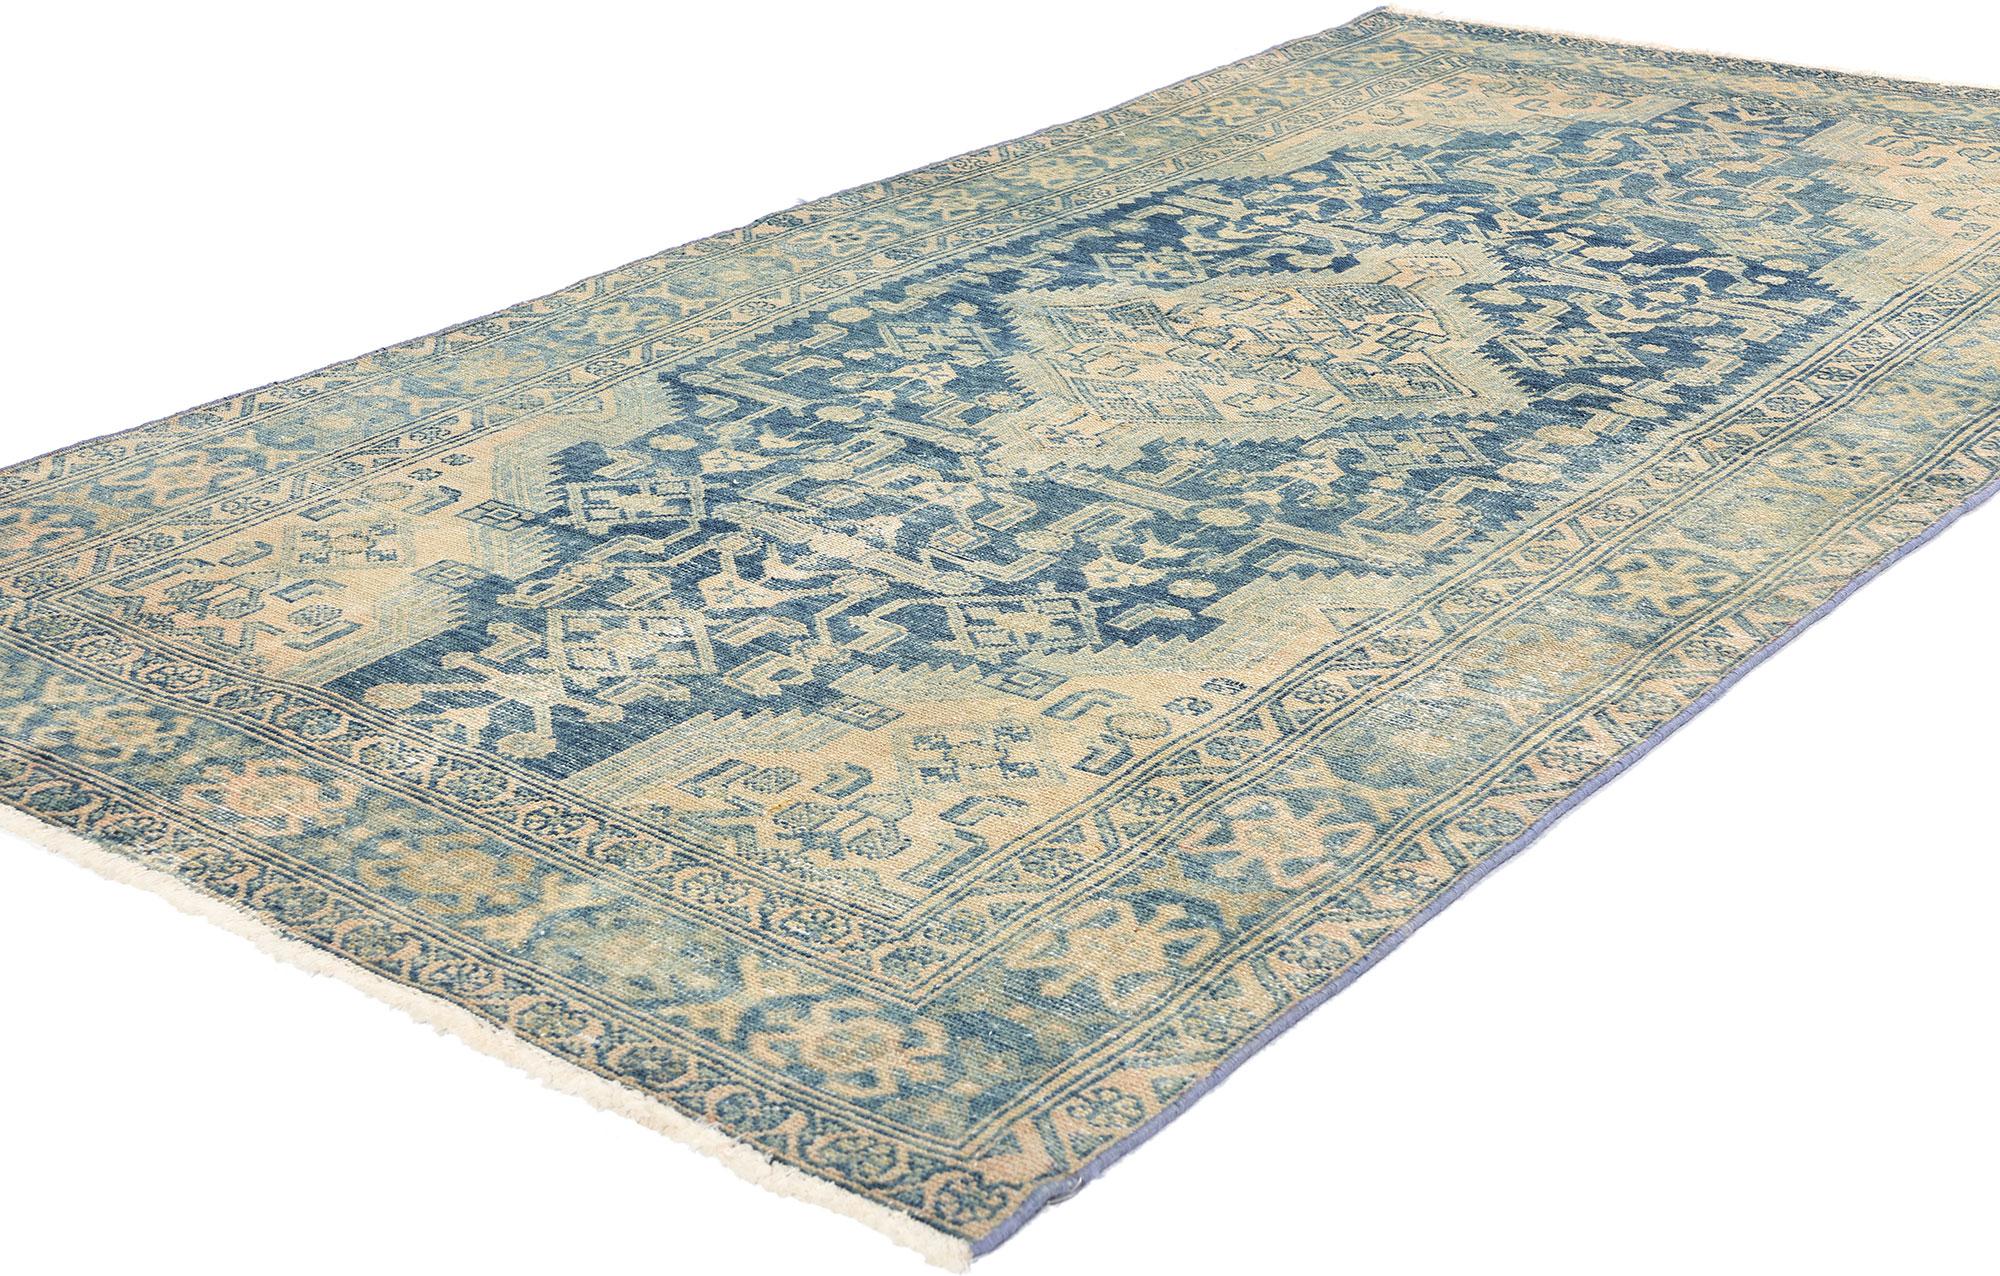 61263 Distressed Antique Persian Malayer Rug, 03'11 x 07'03. Antique-washed Persian Malayer rugs are vintage rugs from the Malayer region in western Iran that have undergone a washing process to achieve a distressed or faded appearance, giving them